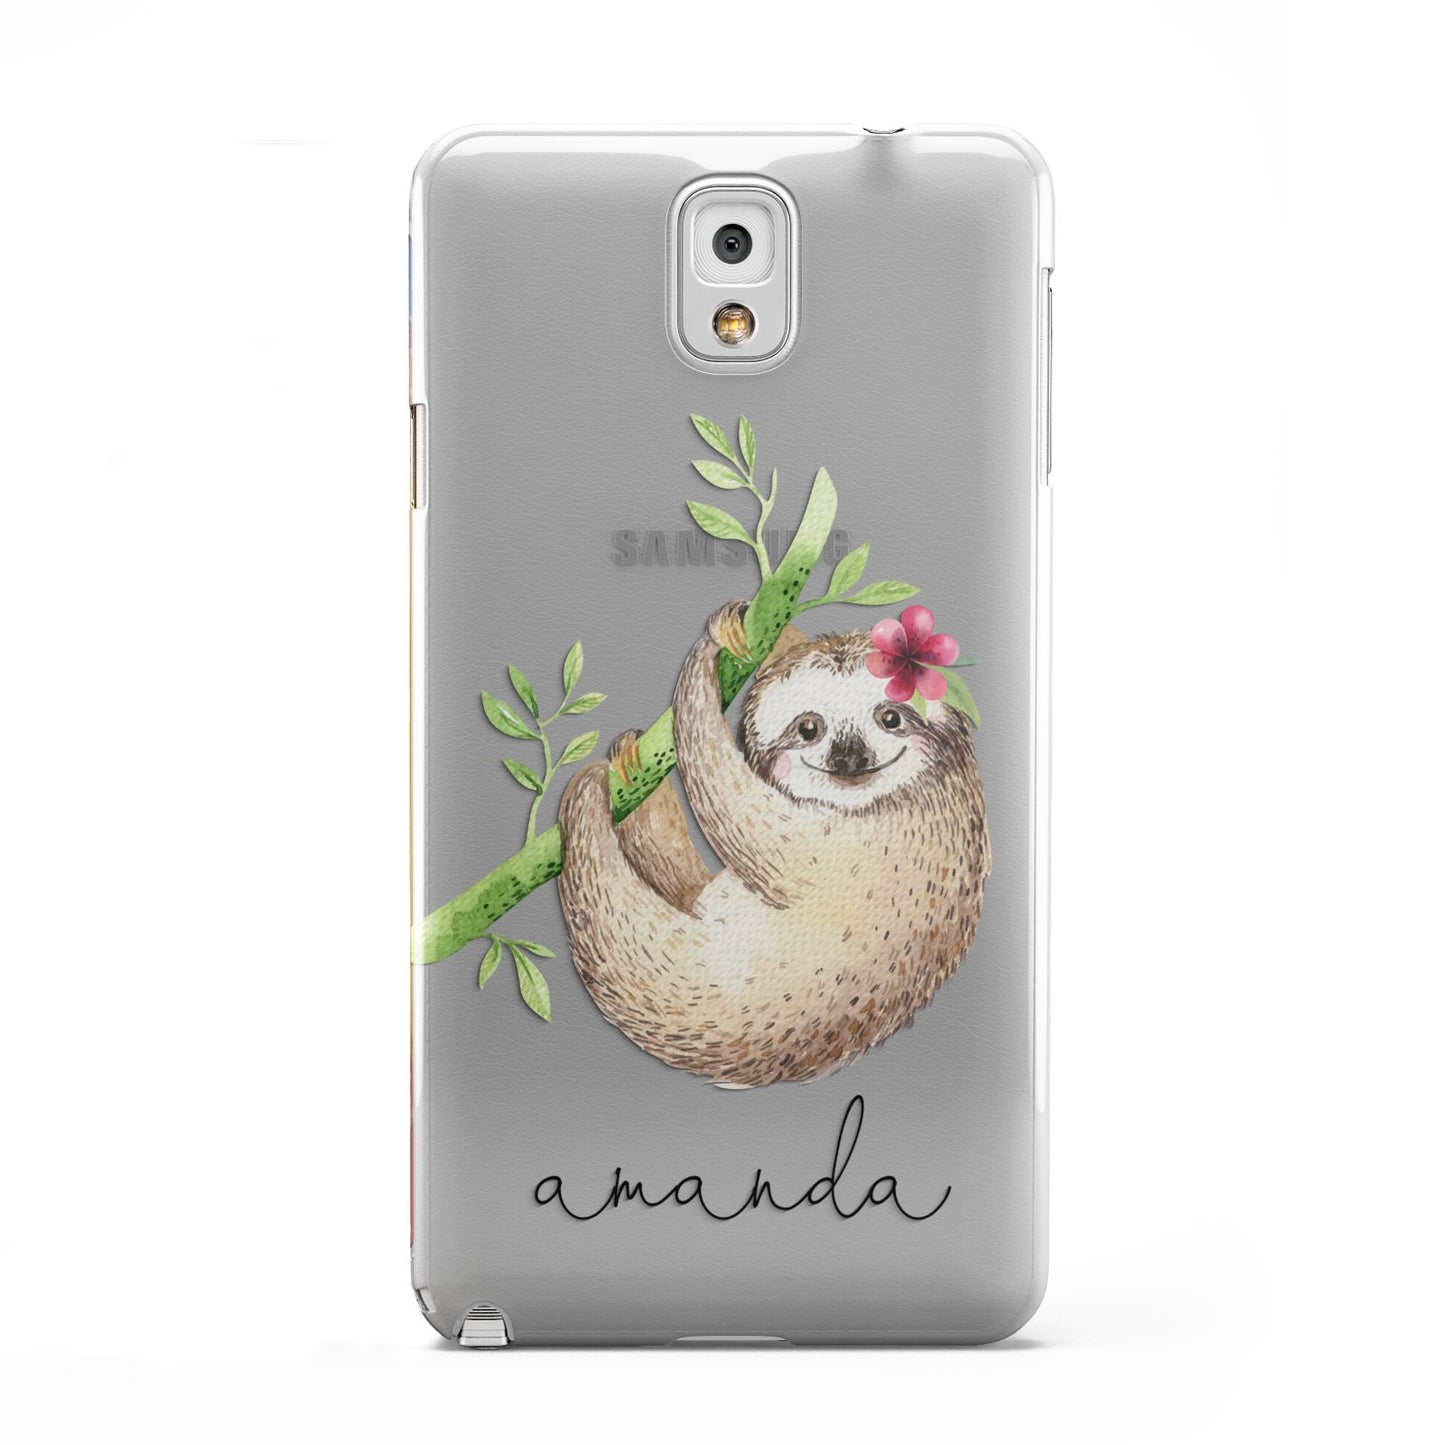 Personalised Sloth Samsung Galaxy Note 3 Case